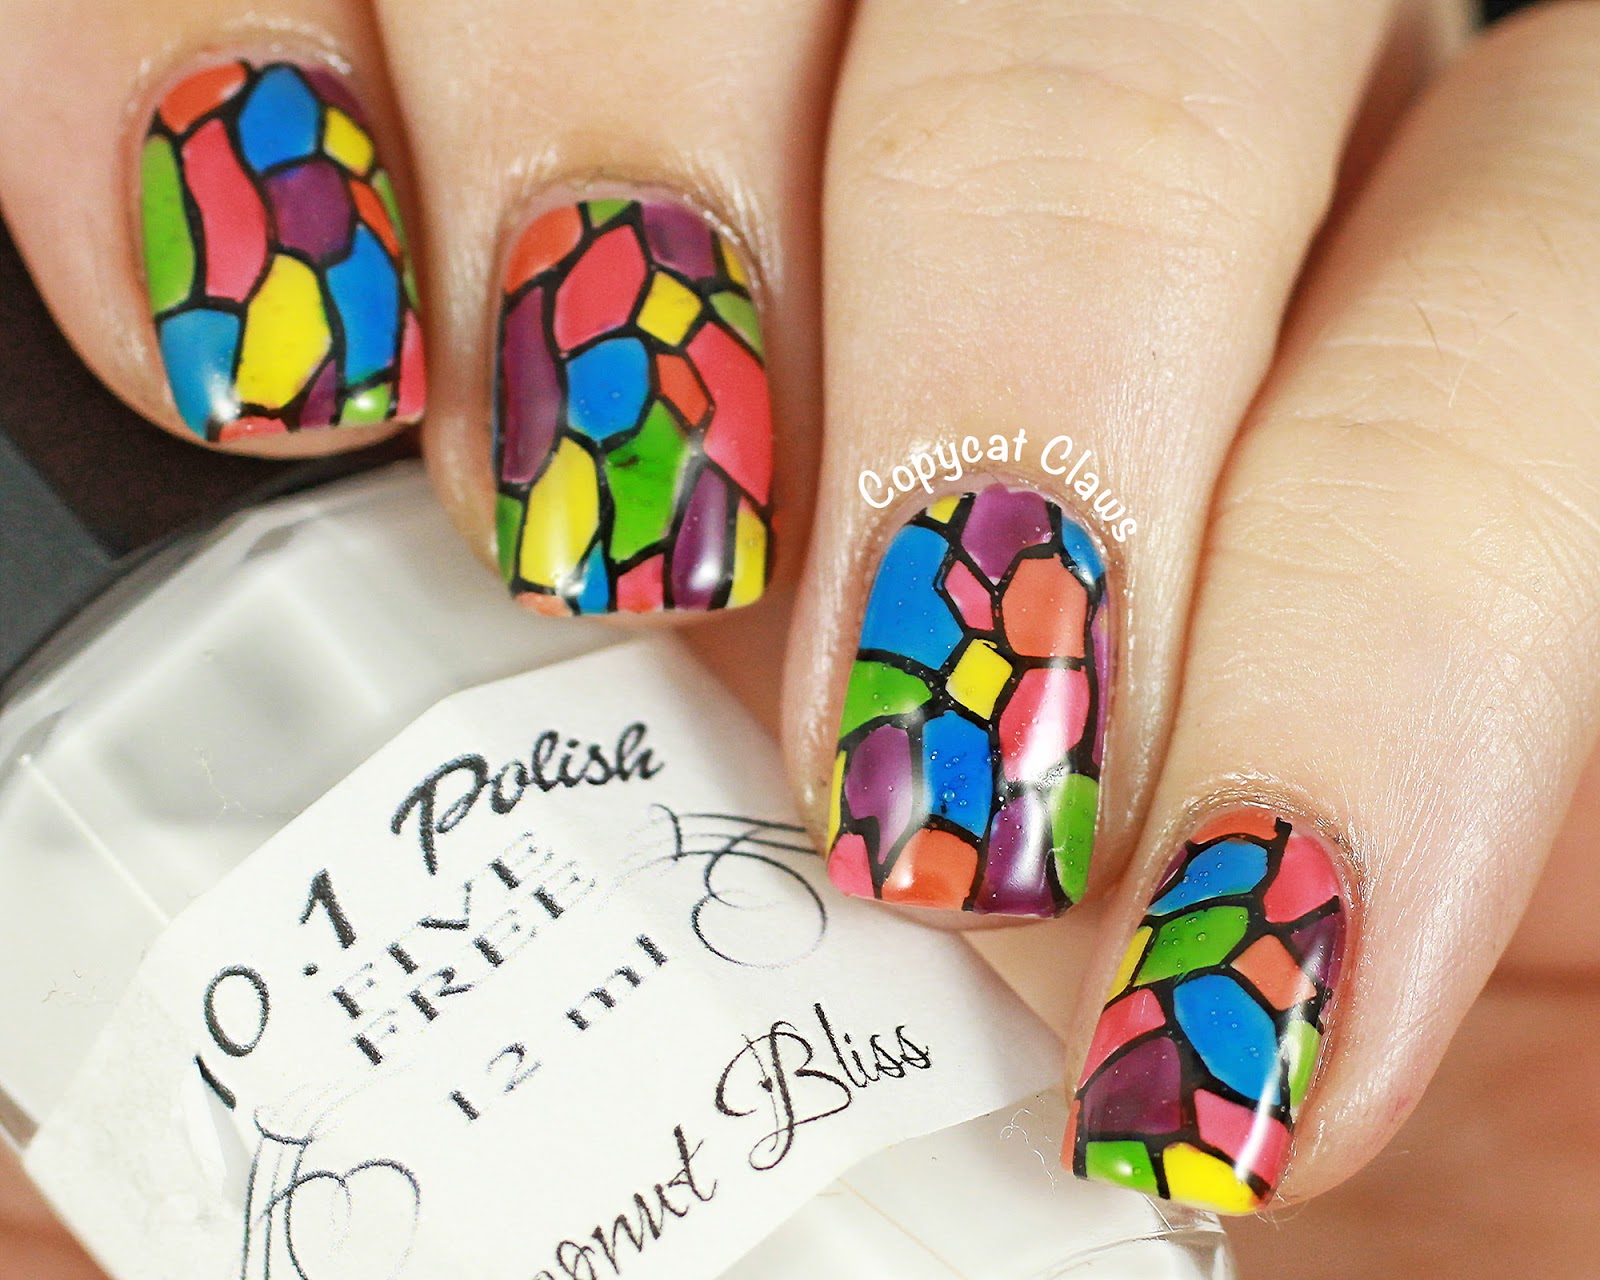 1. Stained Glass Nail Art Design - wide 1